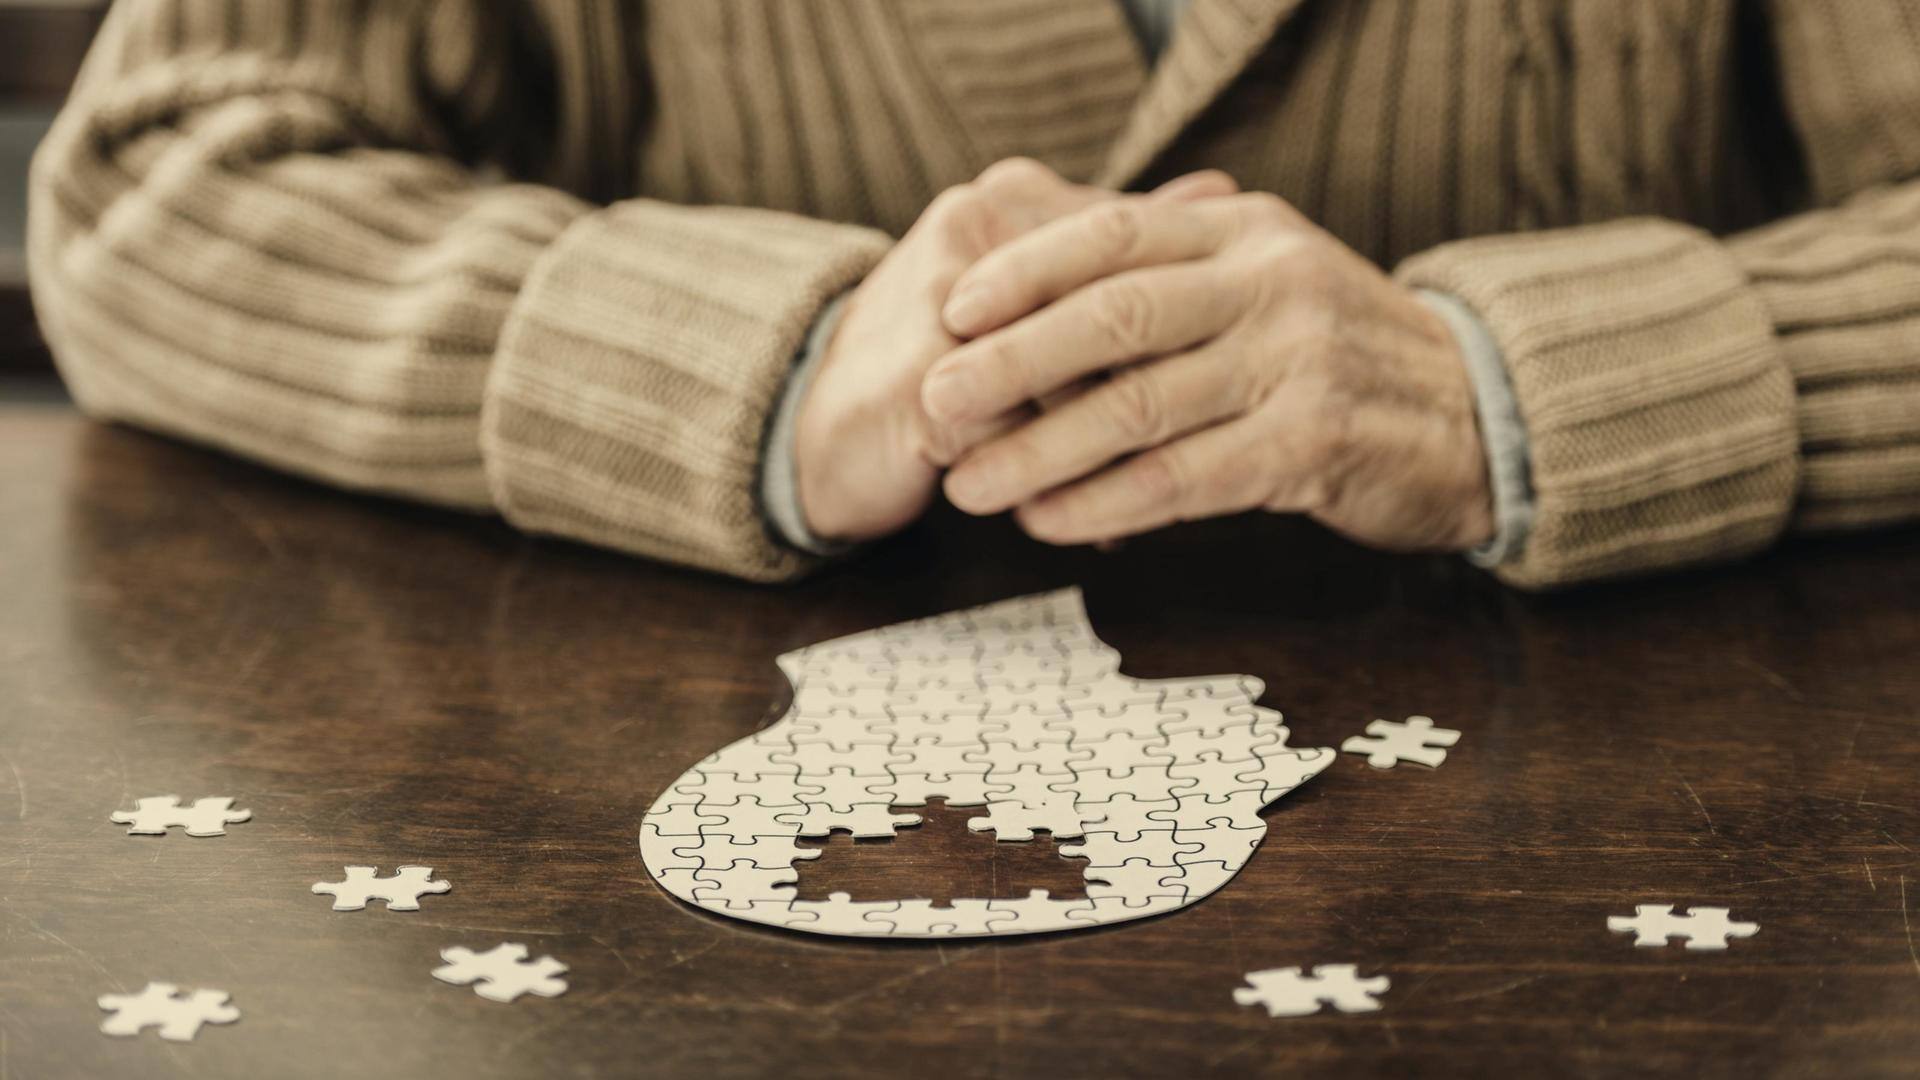 Factors that can increase a person's risk of dementia